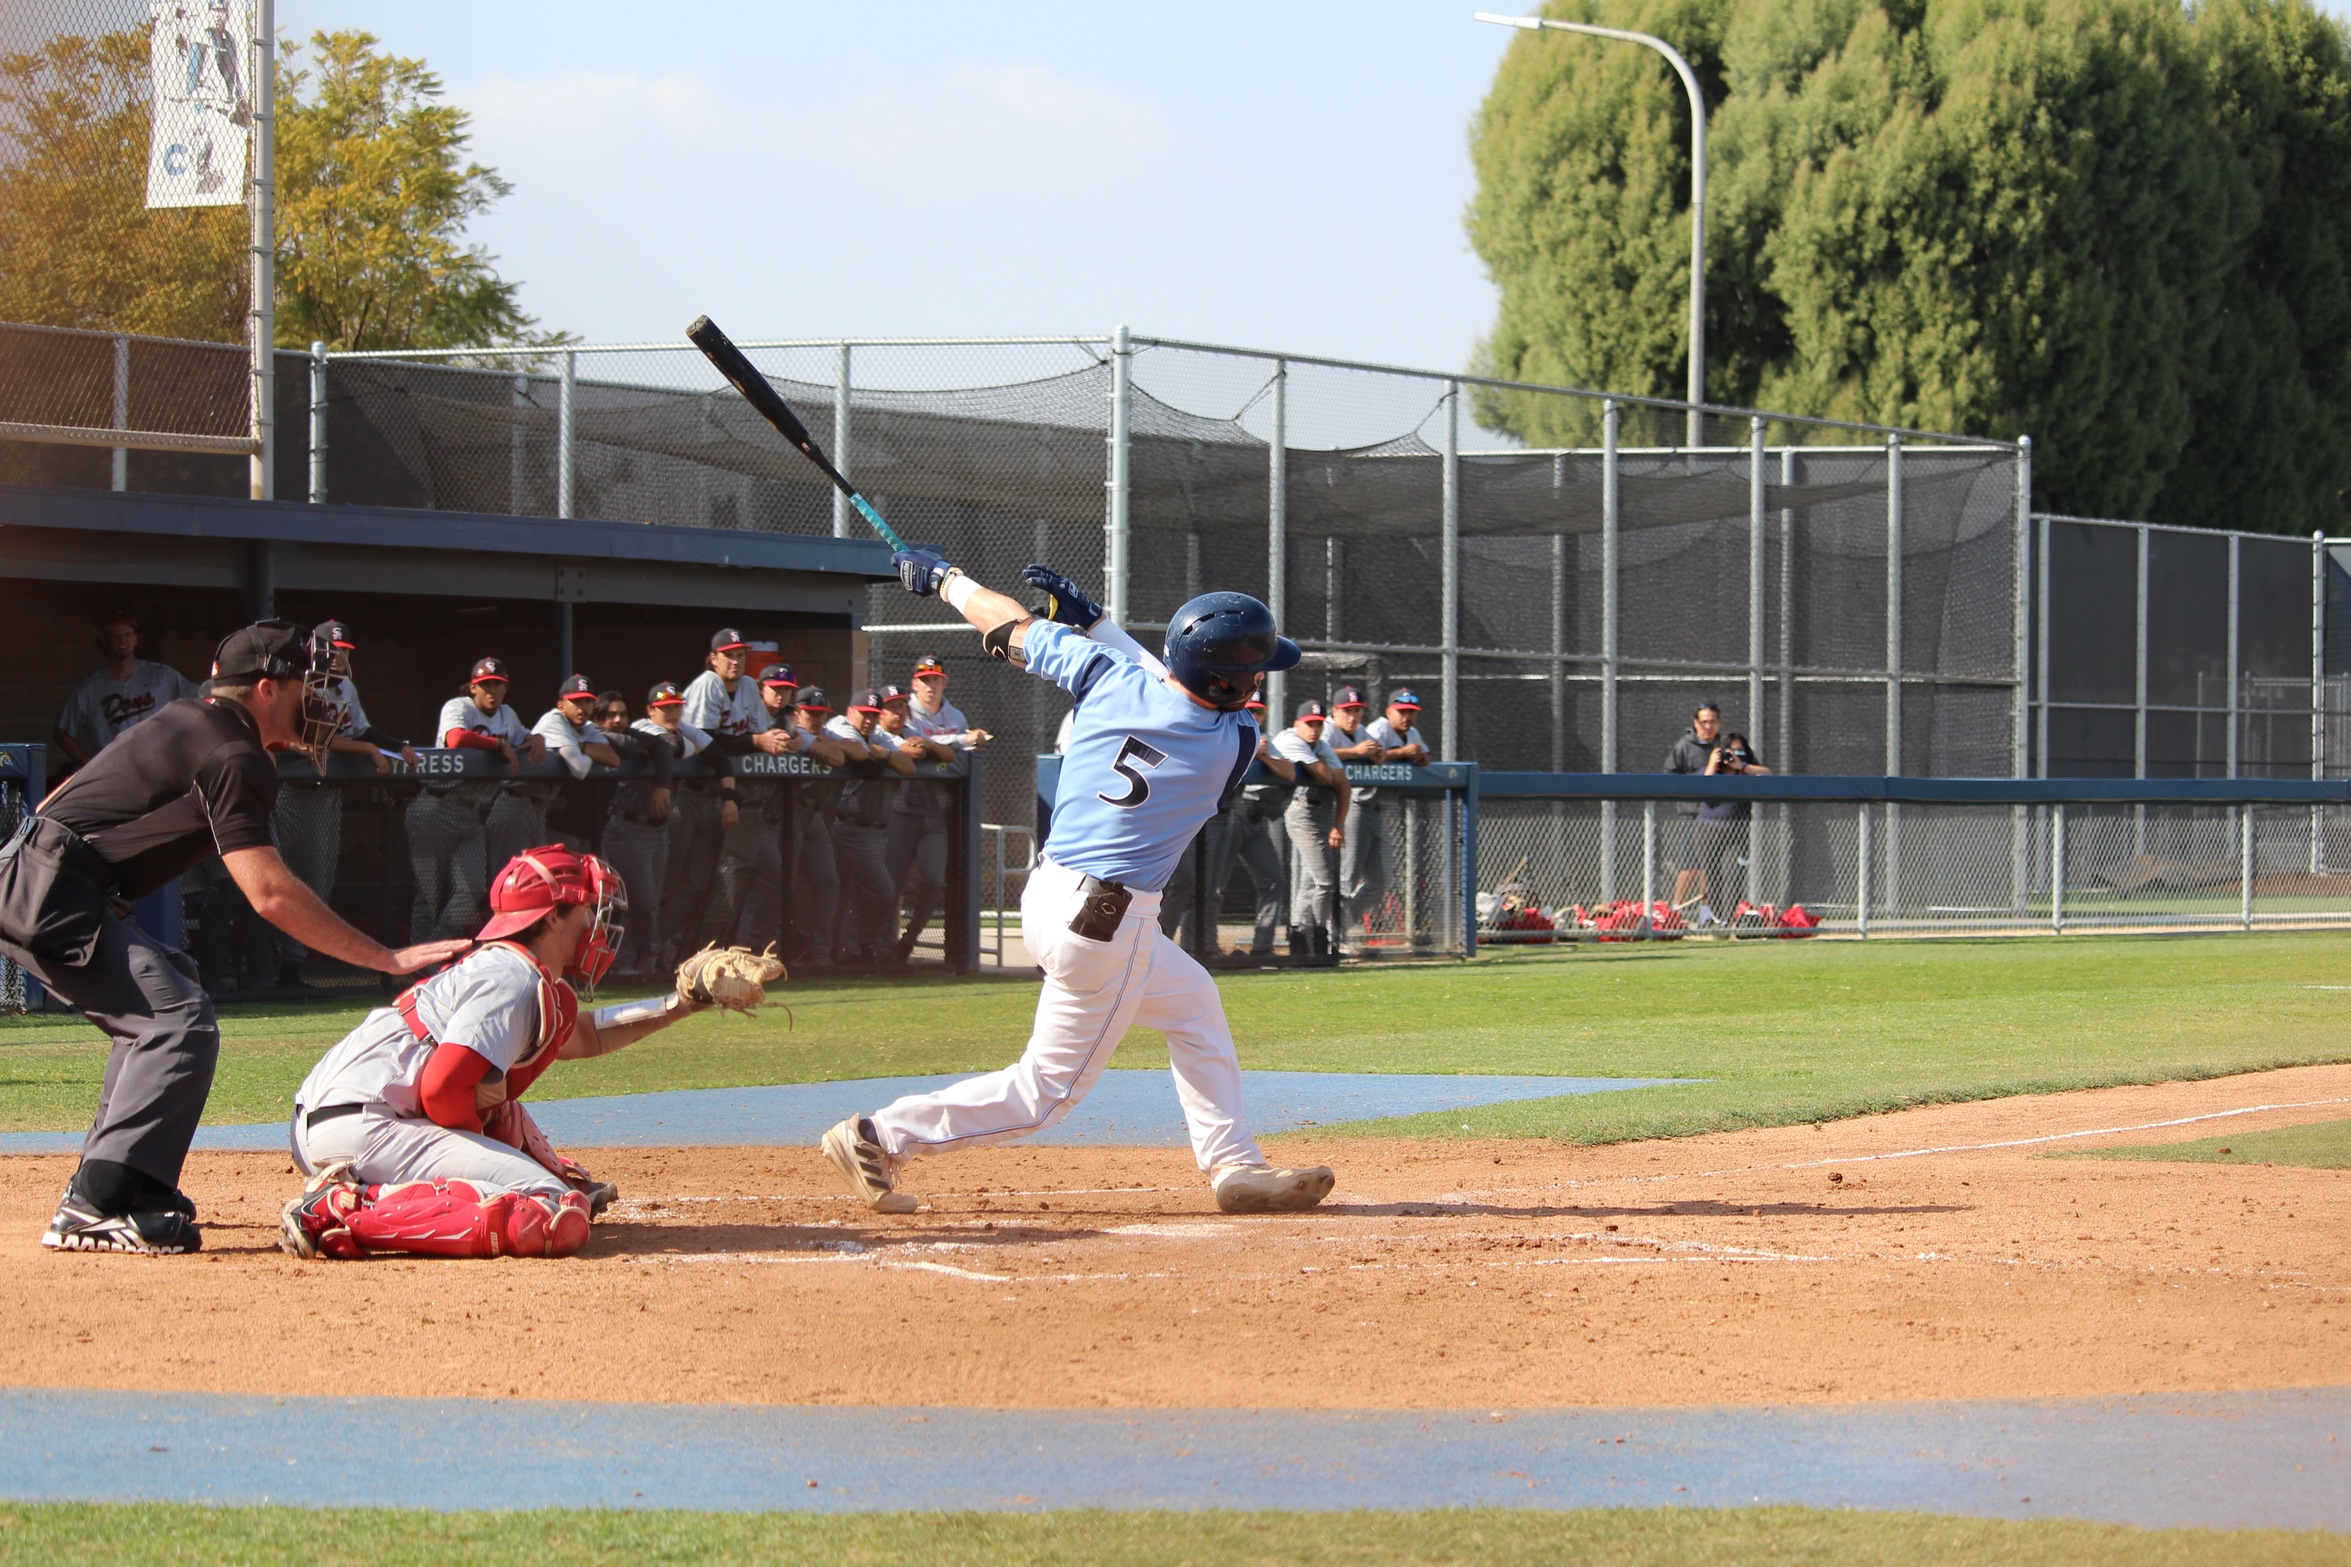 Chargers Late Home Run Makes it Two in a Row Over Santa Ana